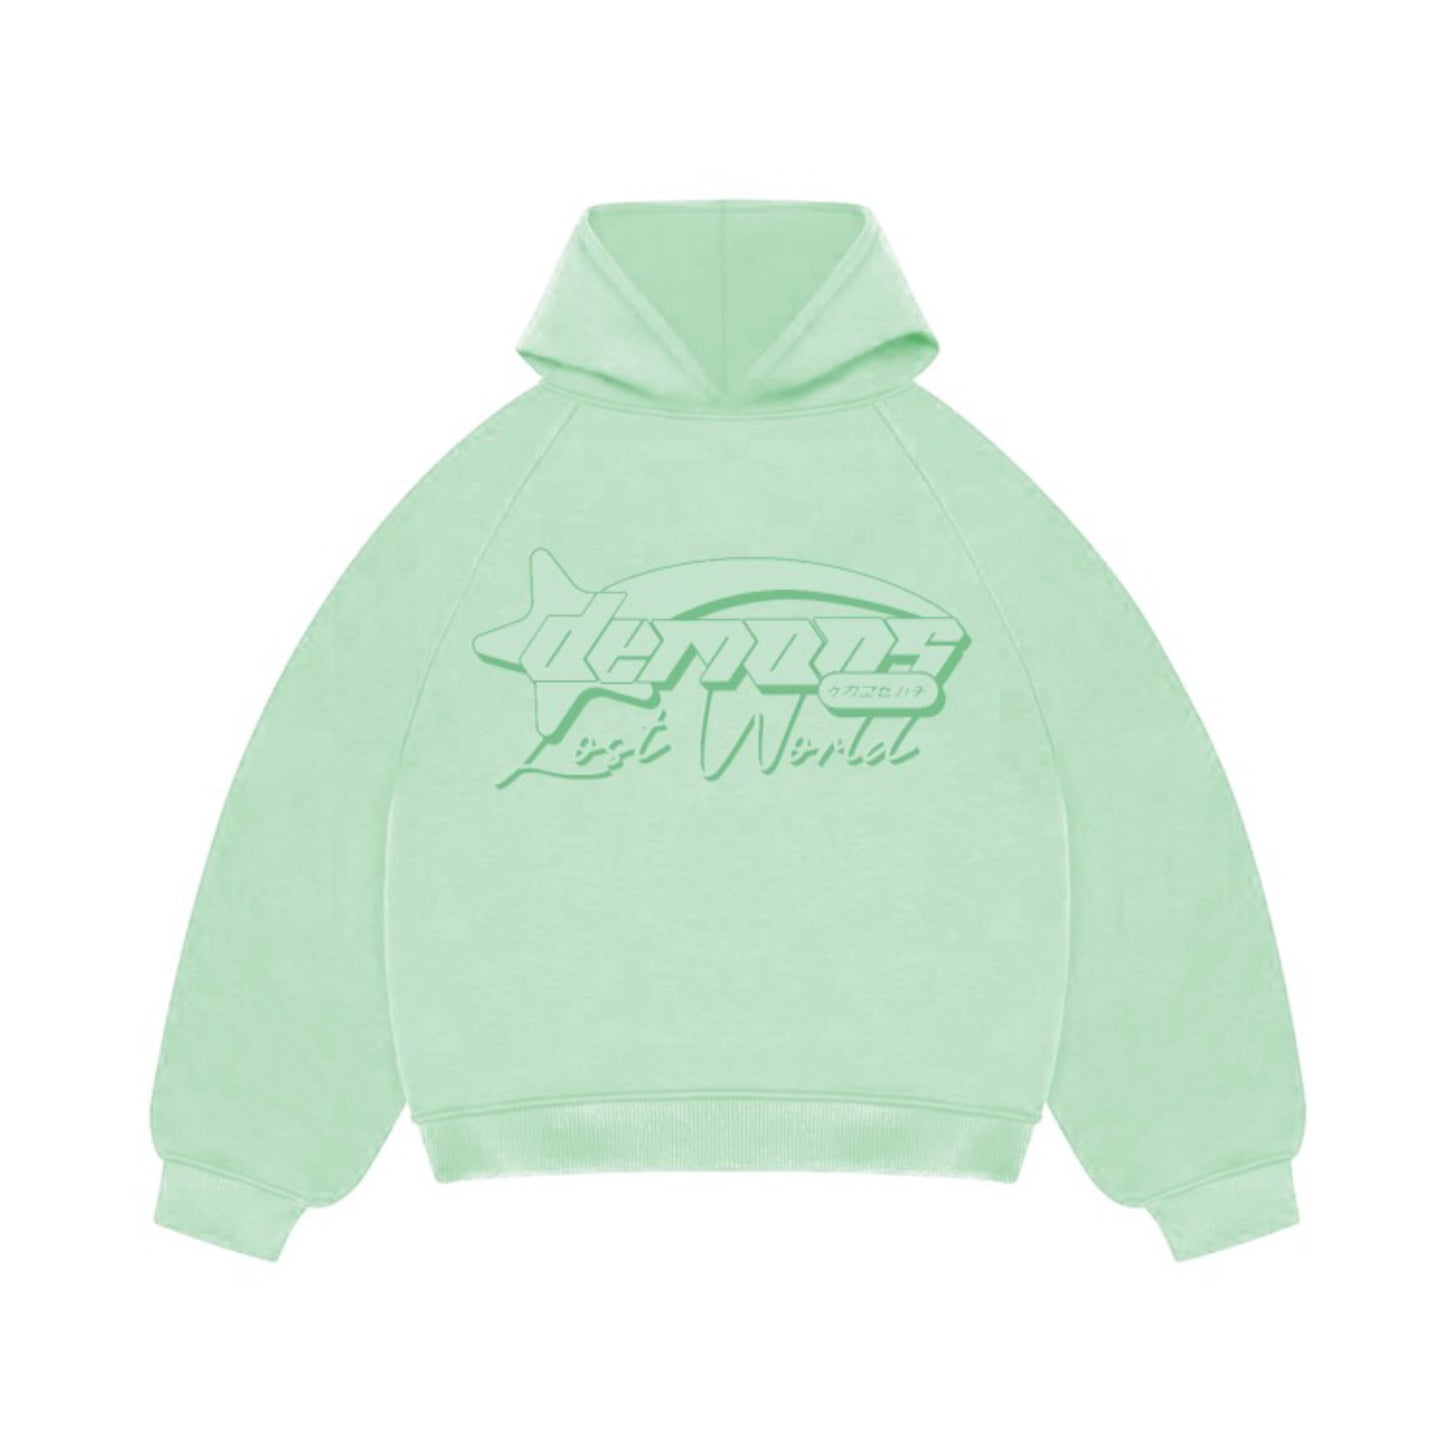 "The Lost World" Hoodie